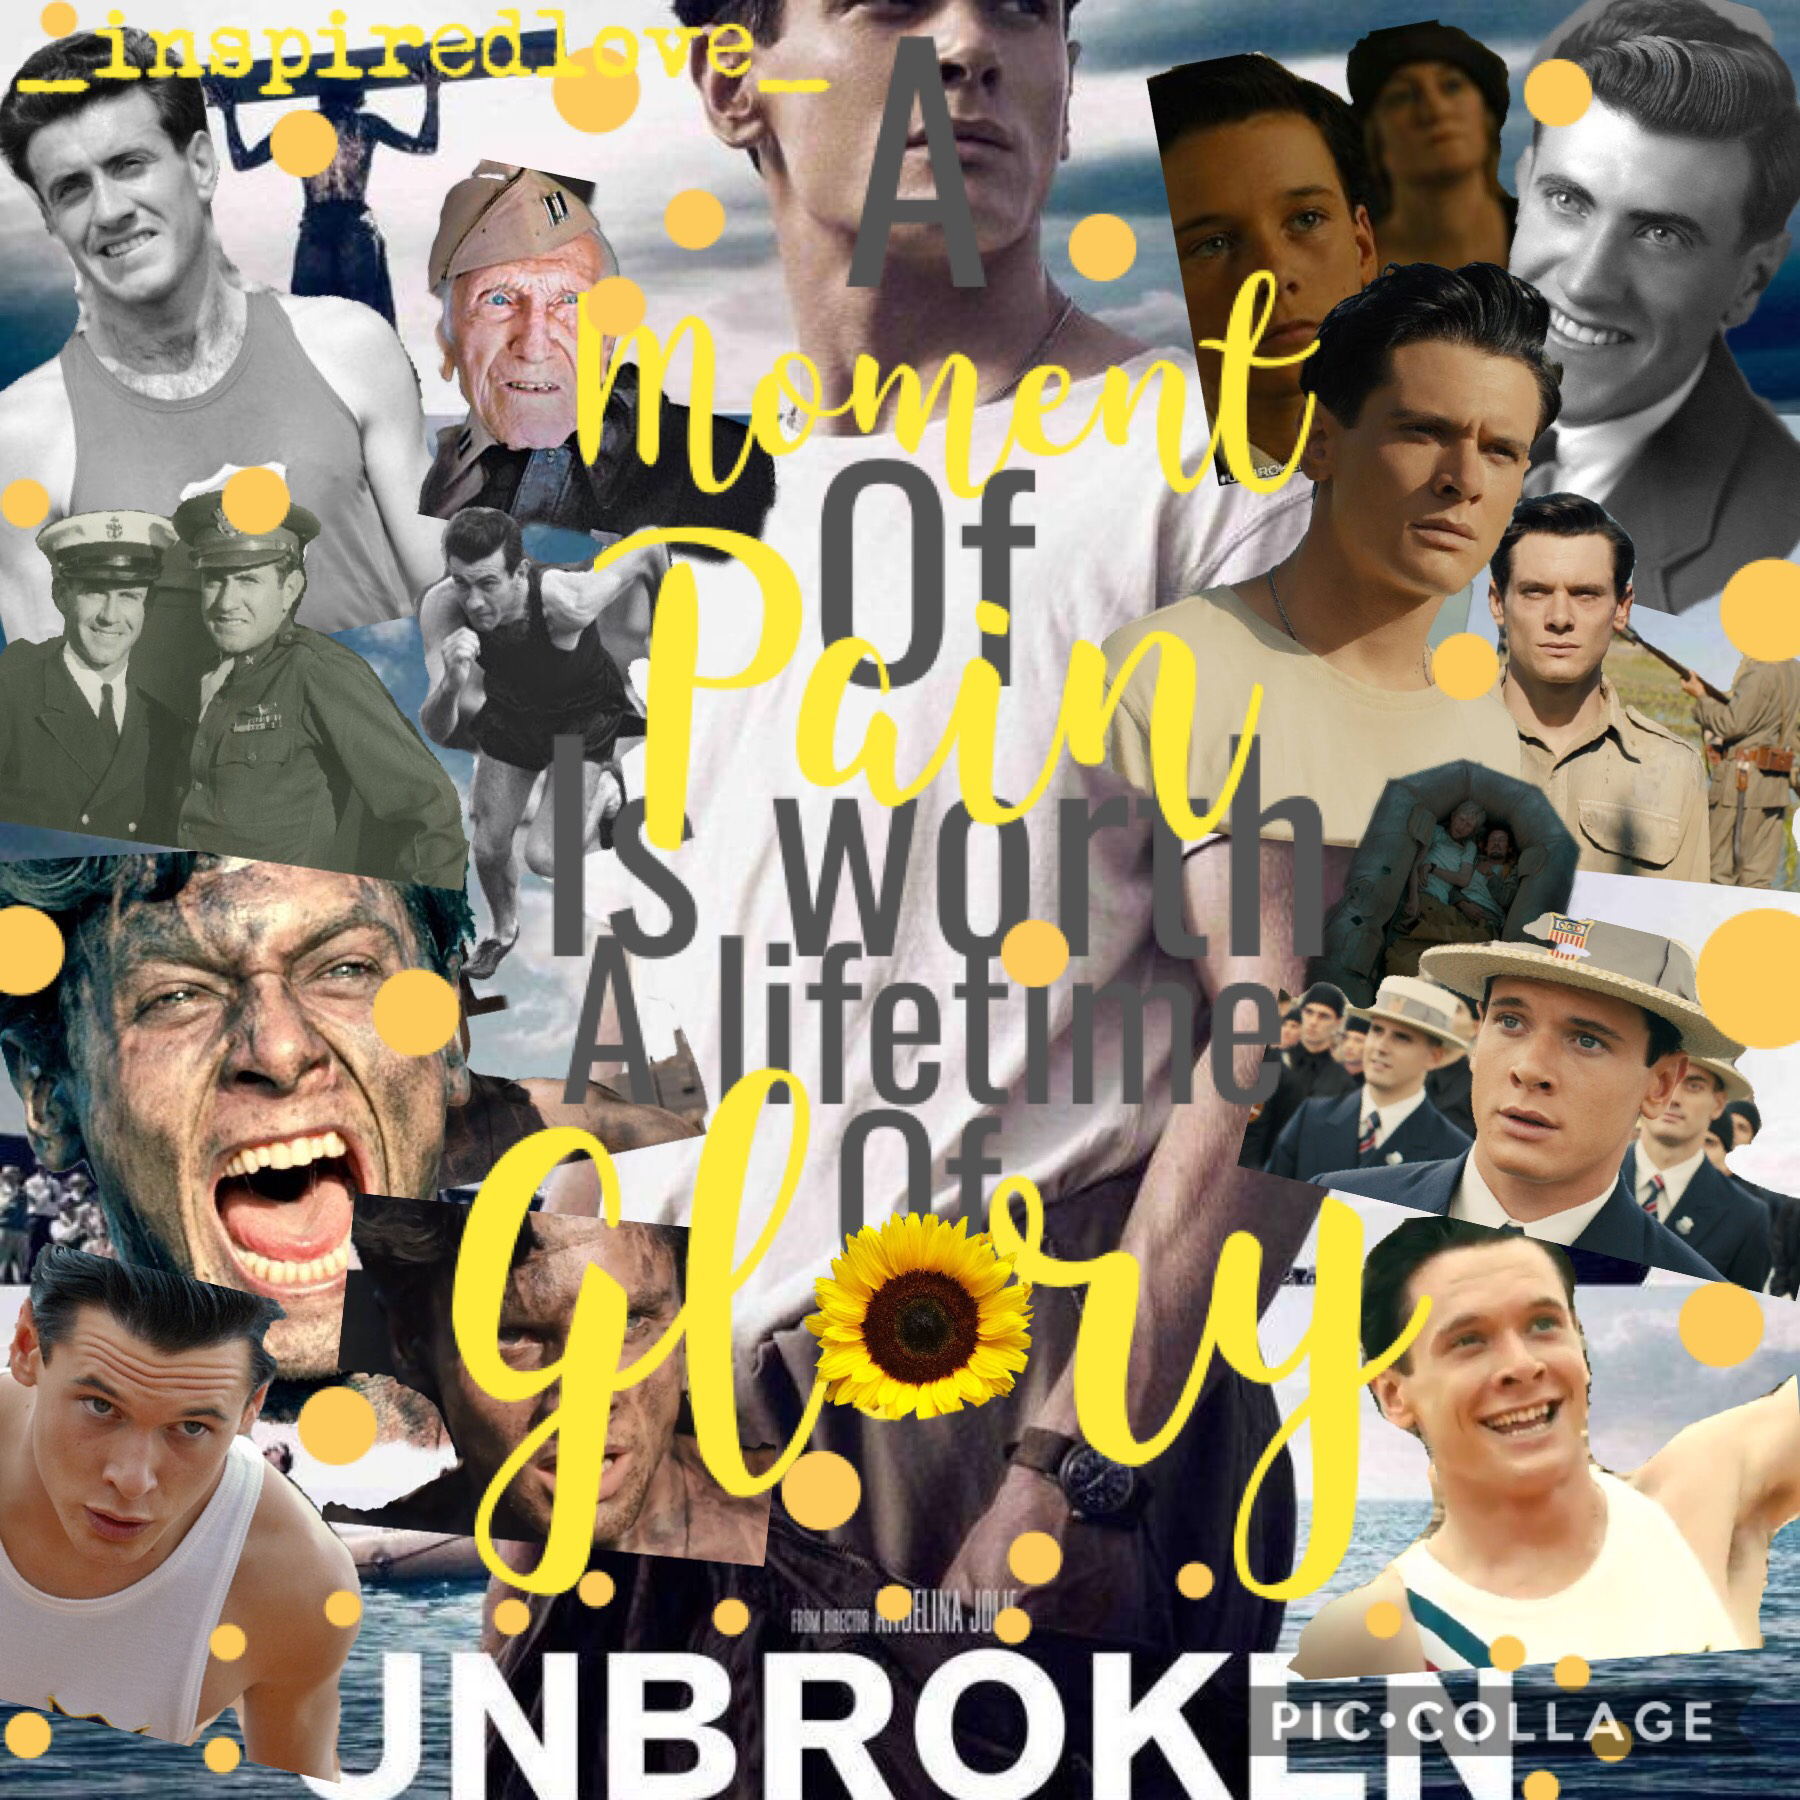 AAHHHH!! Okay, you guys need to watch this movie! It’s called Unbroken and it’s about a true story in WWII. I don’t want to spoil it so just go watch it. Also... Jack O’Connell looks kinda cute in this movie😂 Anyways, have a good day/night💖